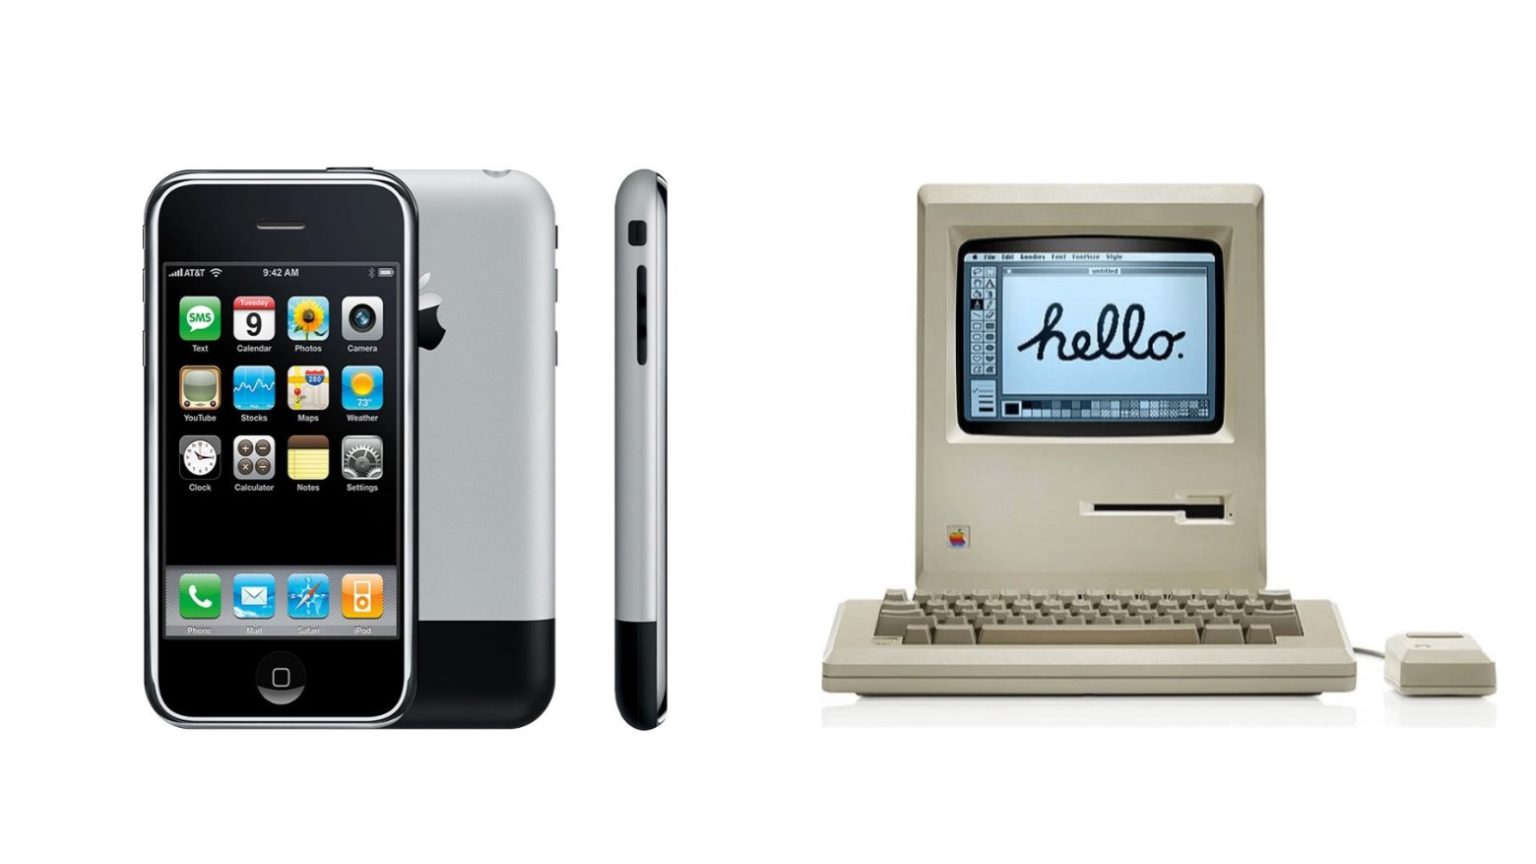 Both iPhone and the 1984 Macintosh make Fortune’s list of “The greatest designs of modern times.”